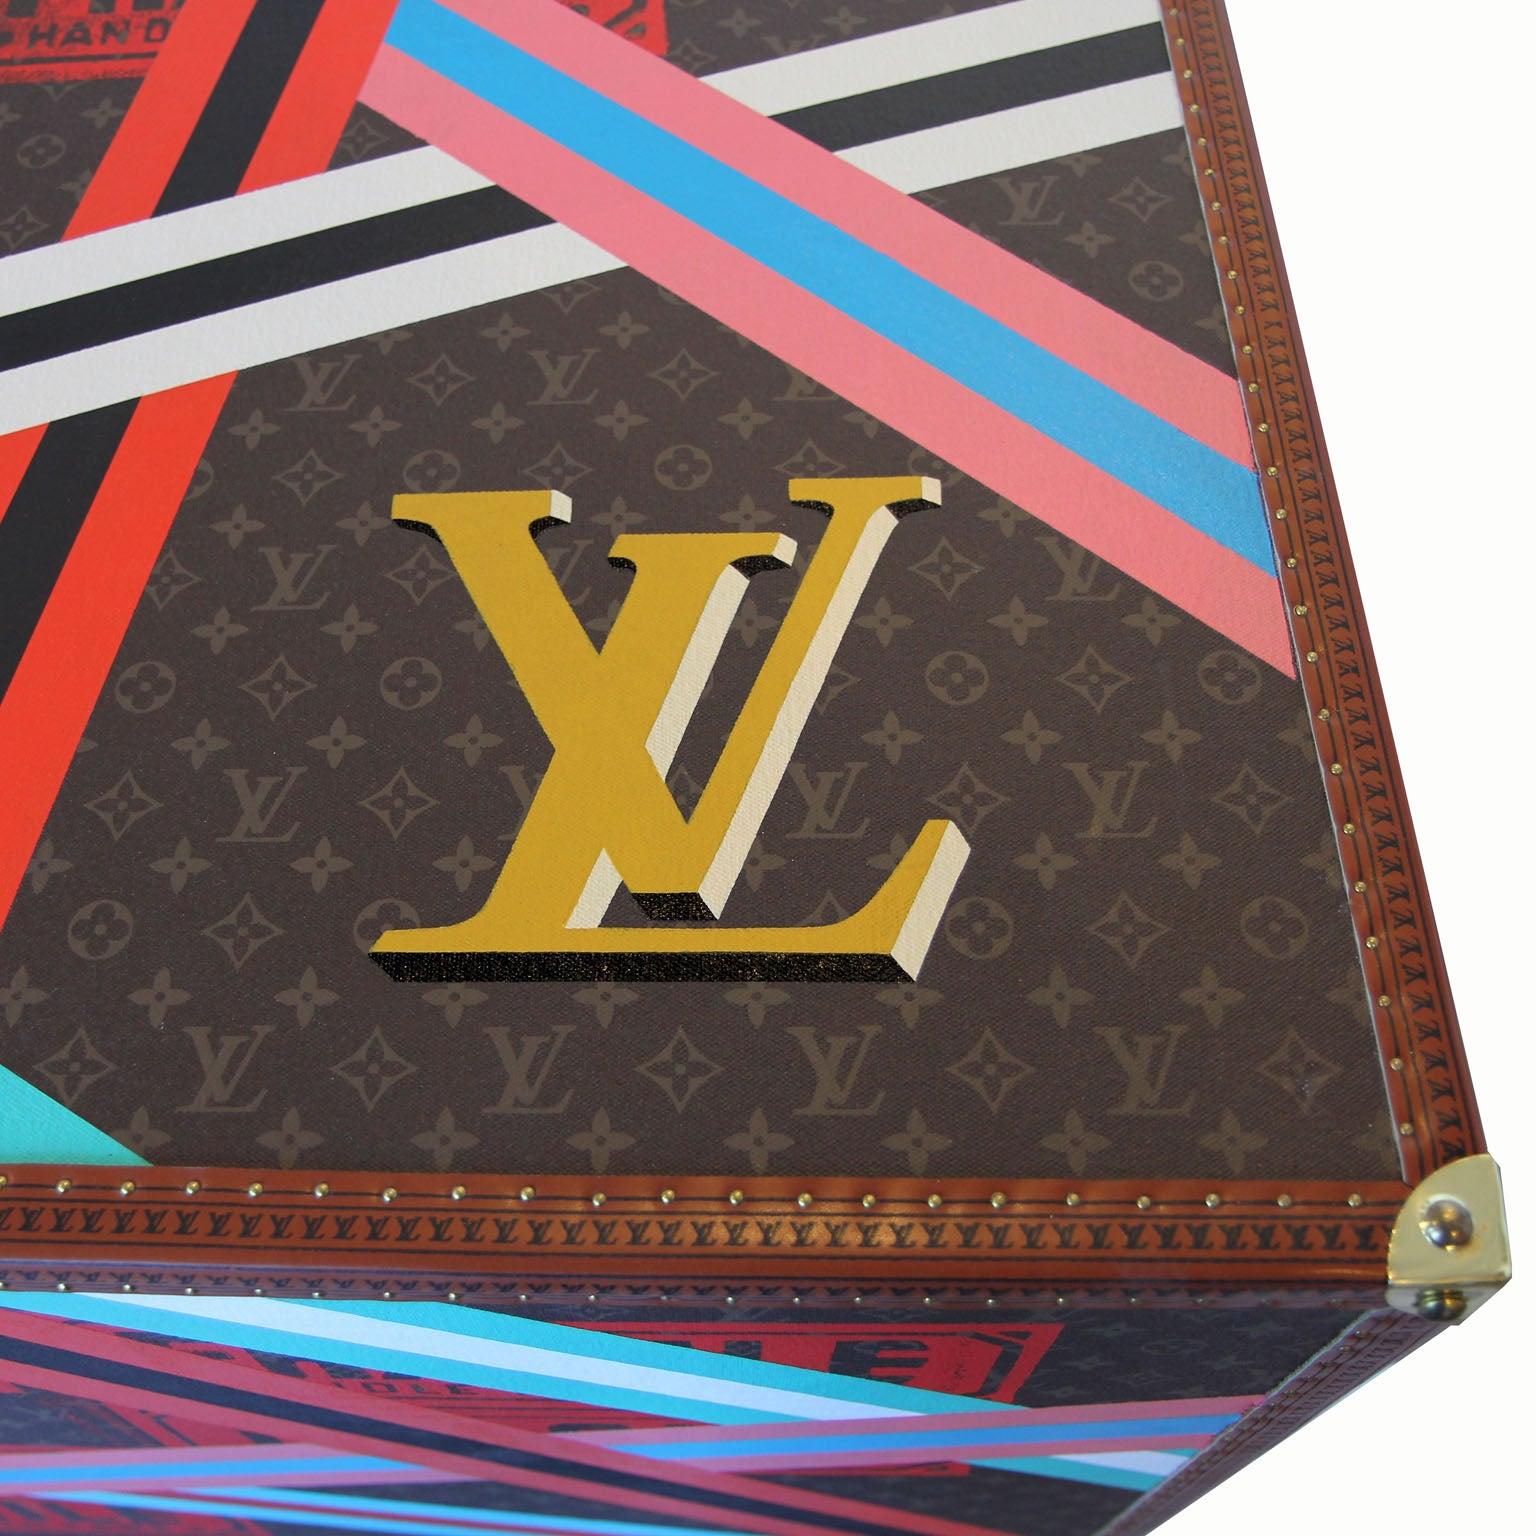 Epeius III Louis Vuitton Andy Warhol Contemporary Art Sculpture by Charles Lutz 1